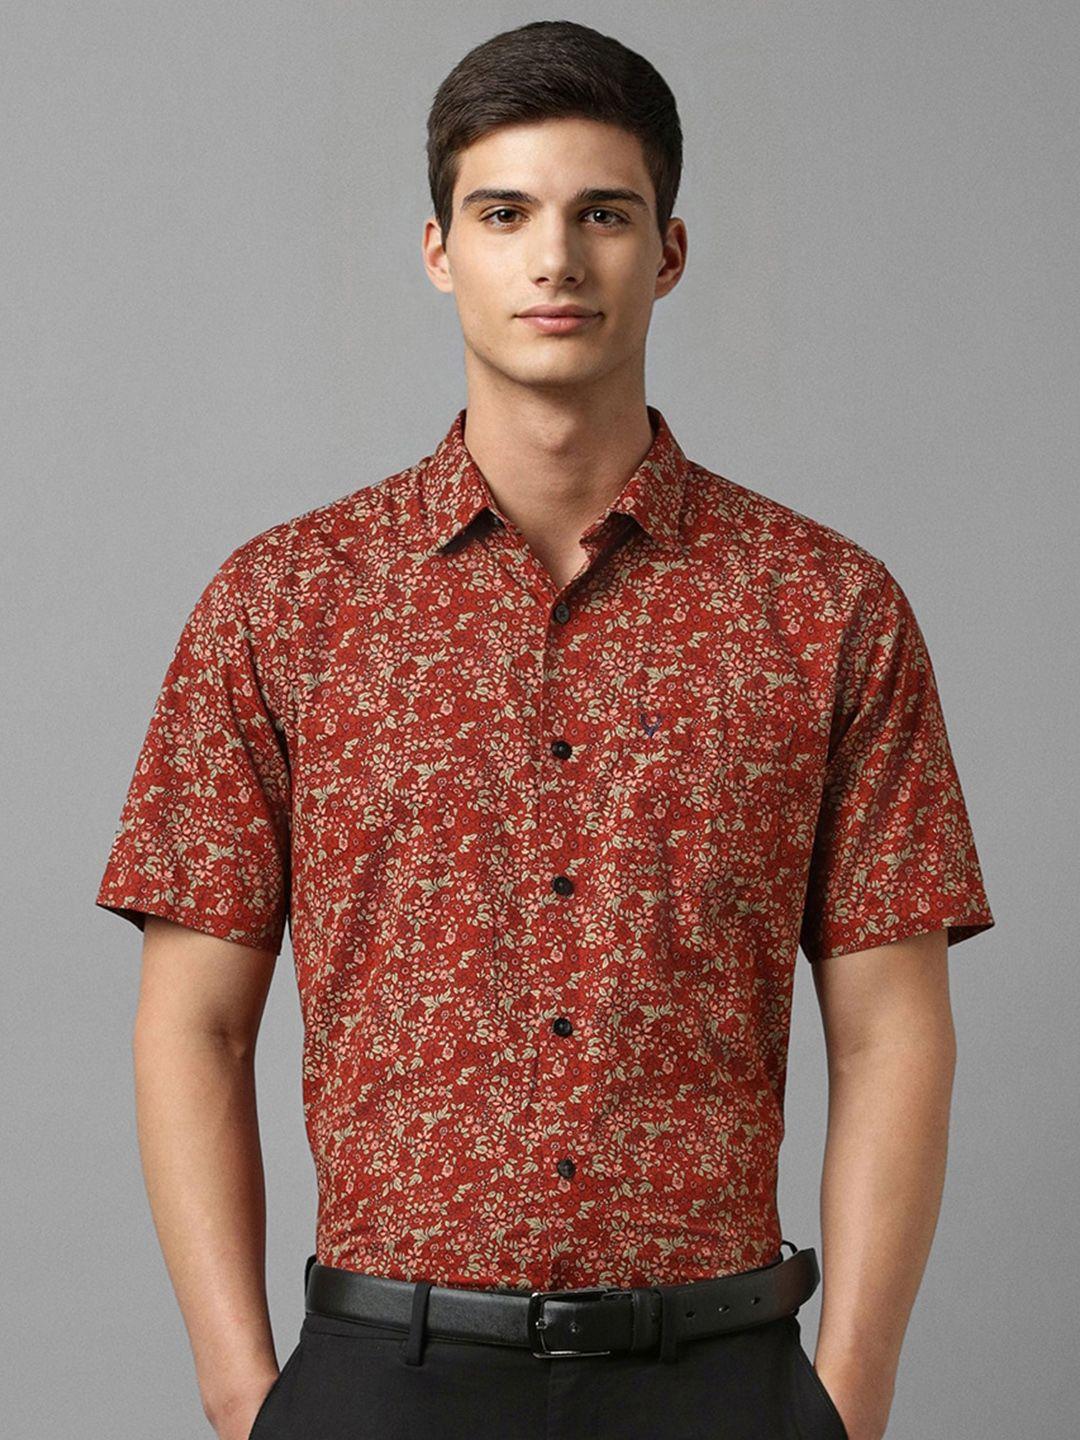 allen solly slim fit floral printed pure cotton formal shirt